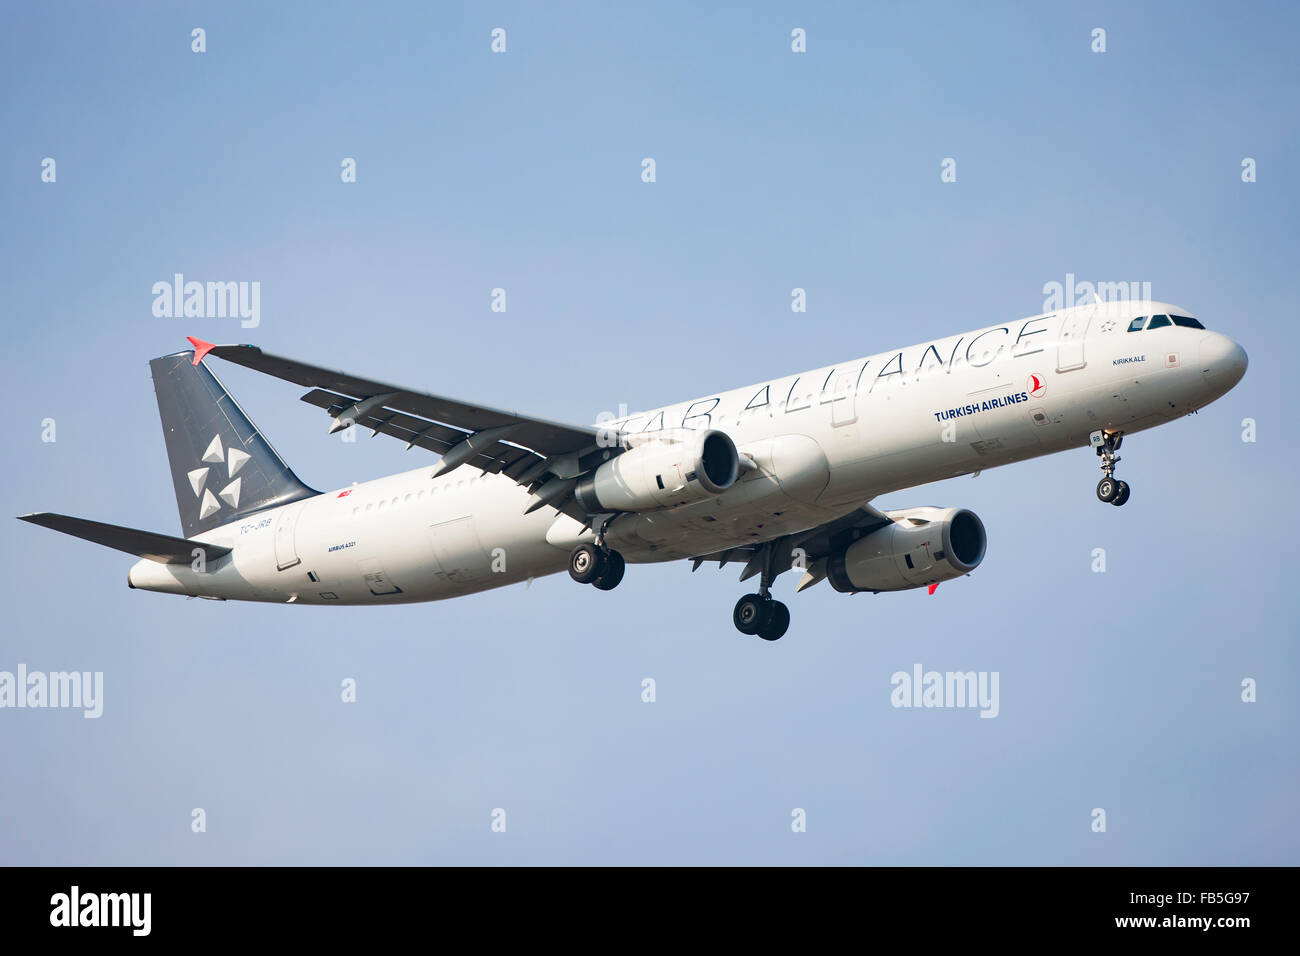 Star Alliance Airliner Stock Photo